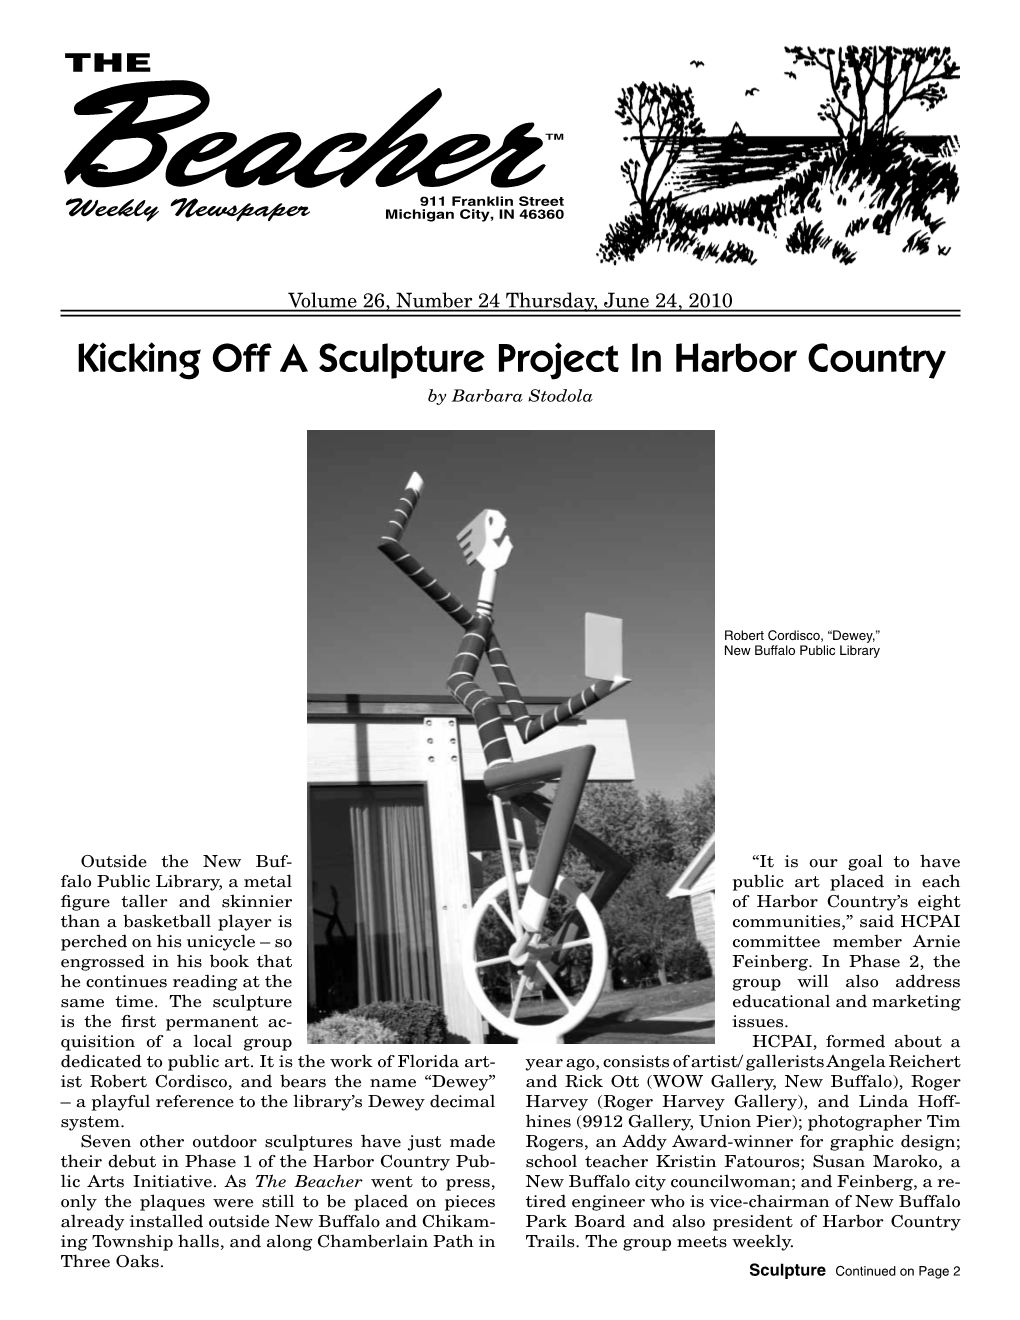 Kicking Off a Sculpture Project in Harbor Country by Barbara Stodola